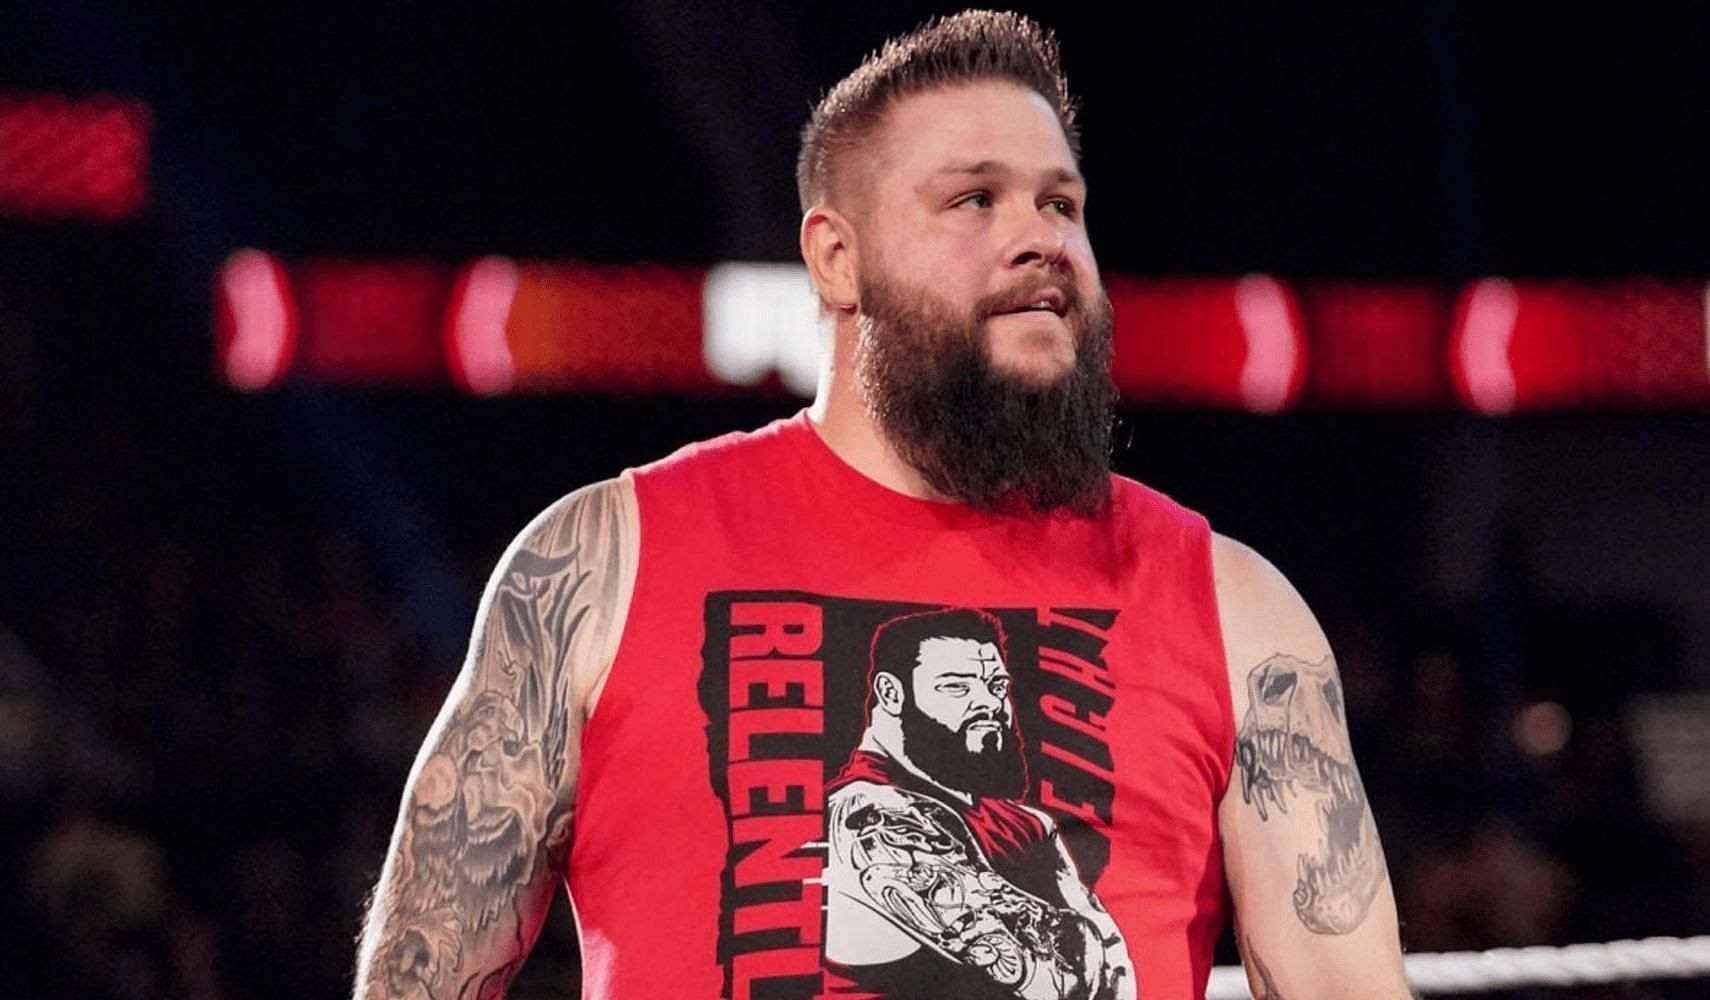 Kevin Owens on Monday night RAW